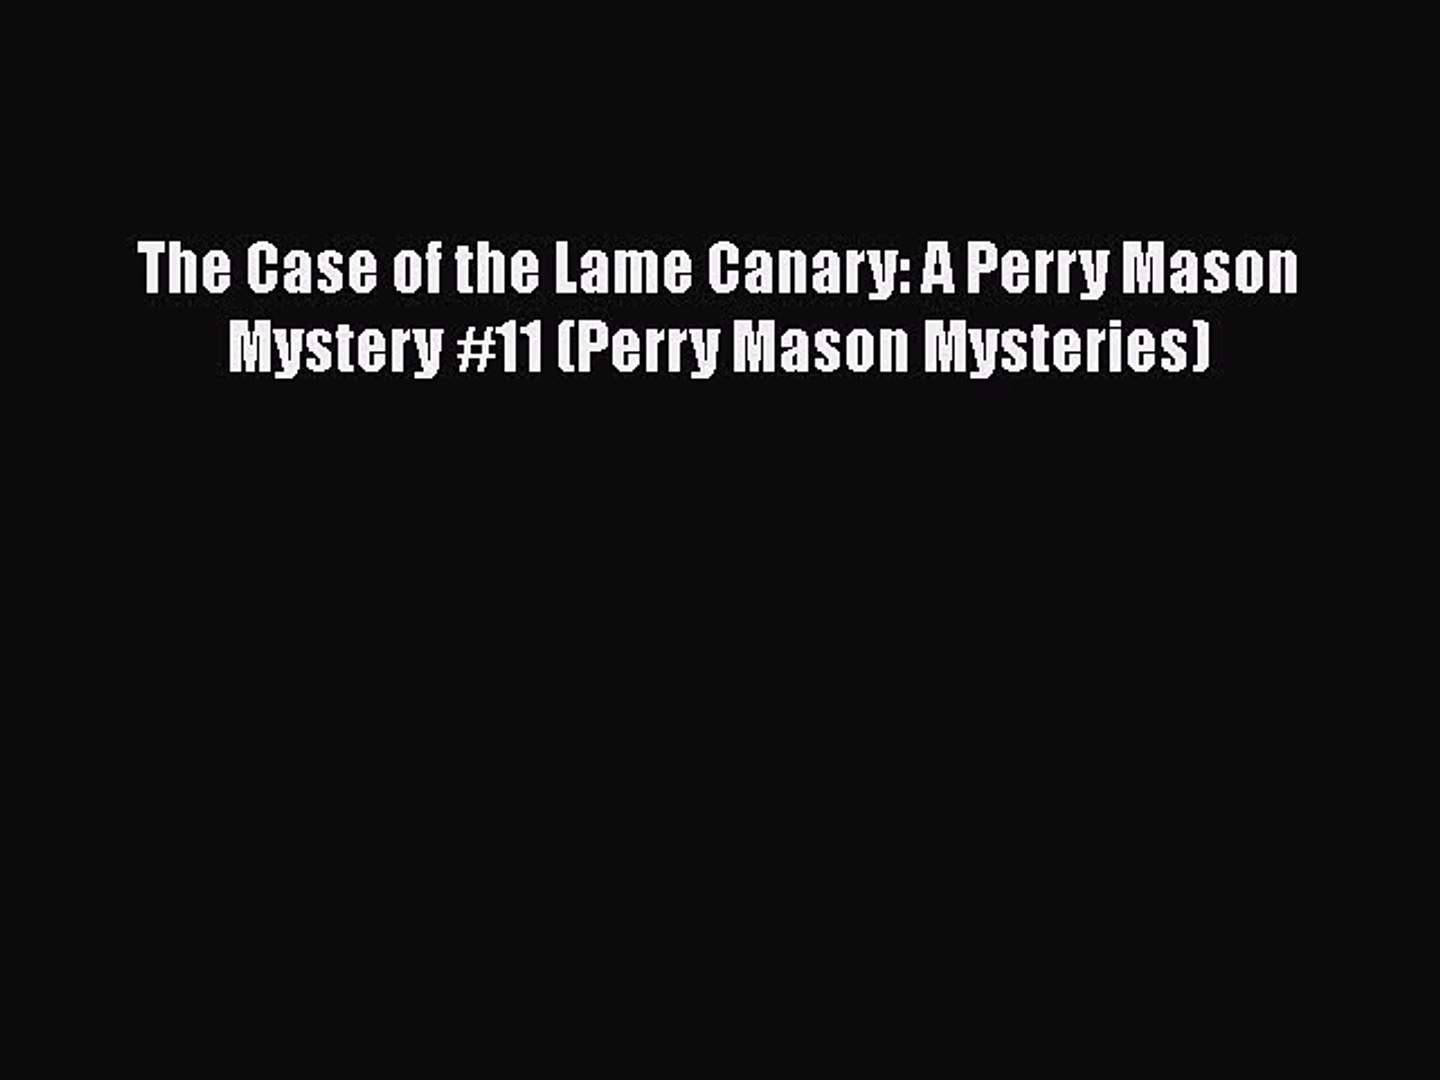 Download The Case of the Lame Canary: A Perry Mason Mystery #11 (Perry Mason Mysteries)  Read